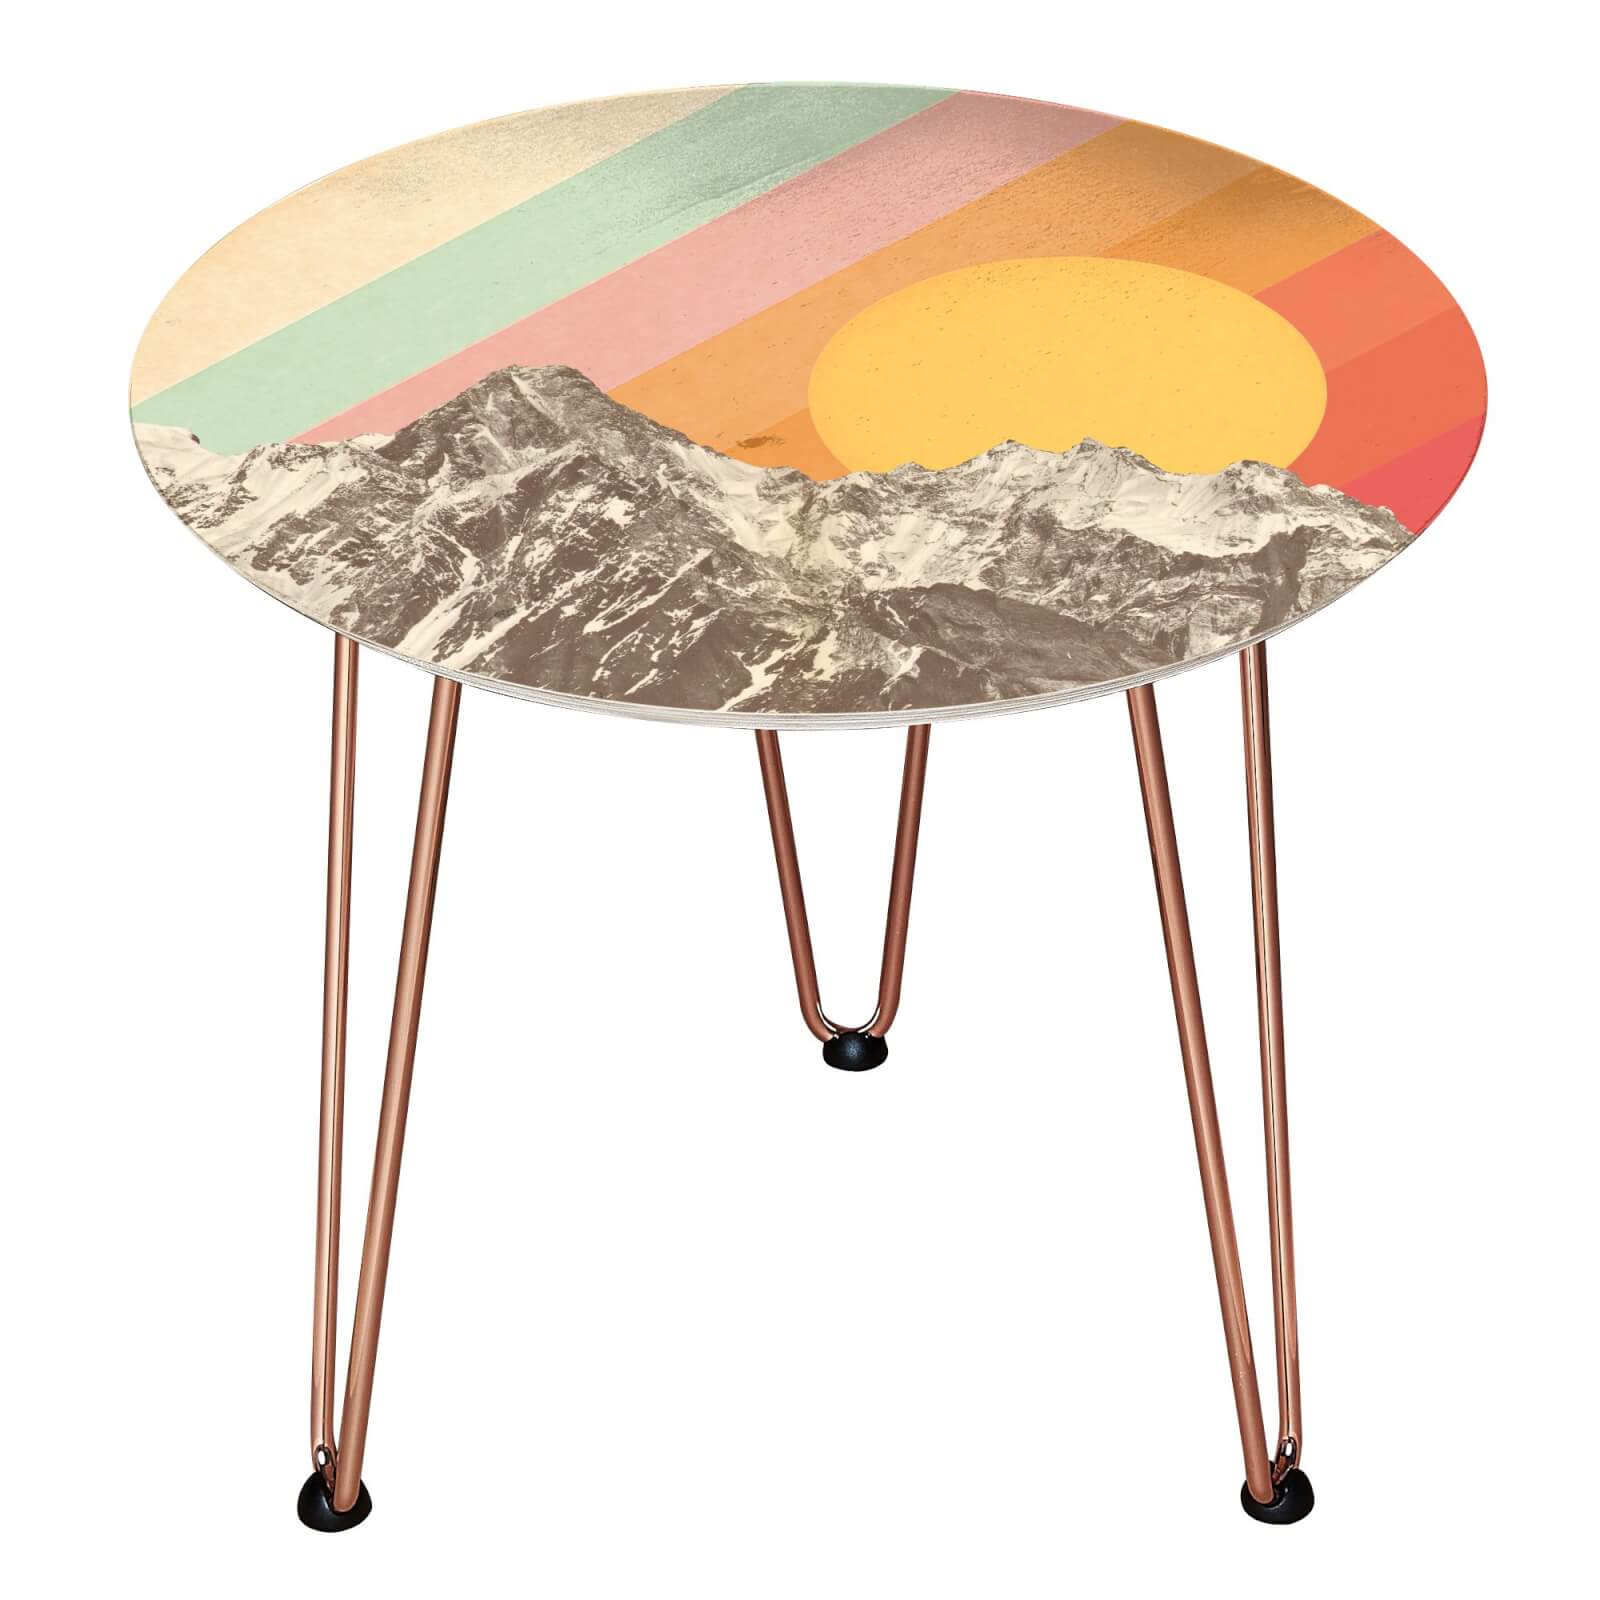 Mountainscape Wooden Side Table - Rose gold